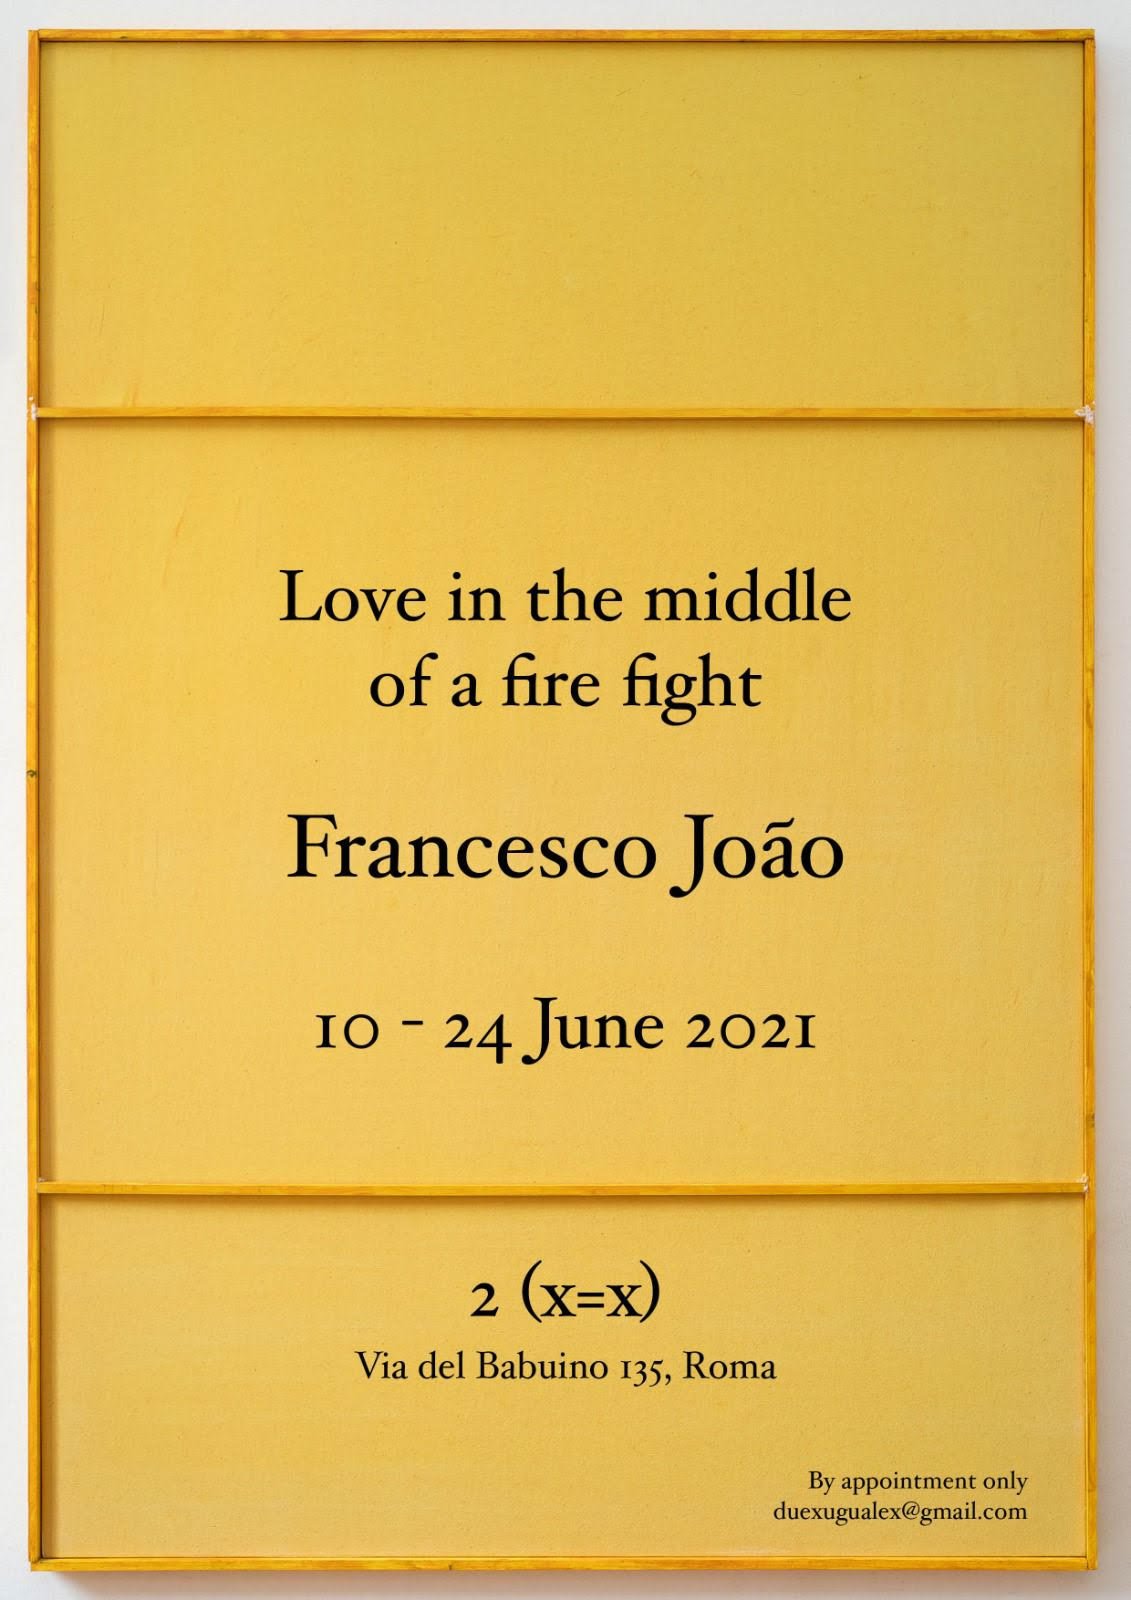 Francesco João – Love in the middle of a fire fight